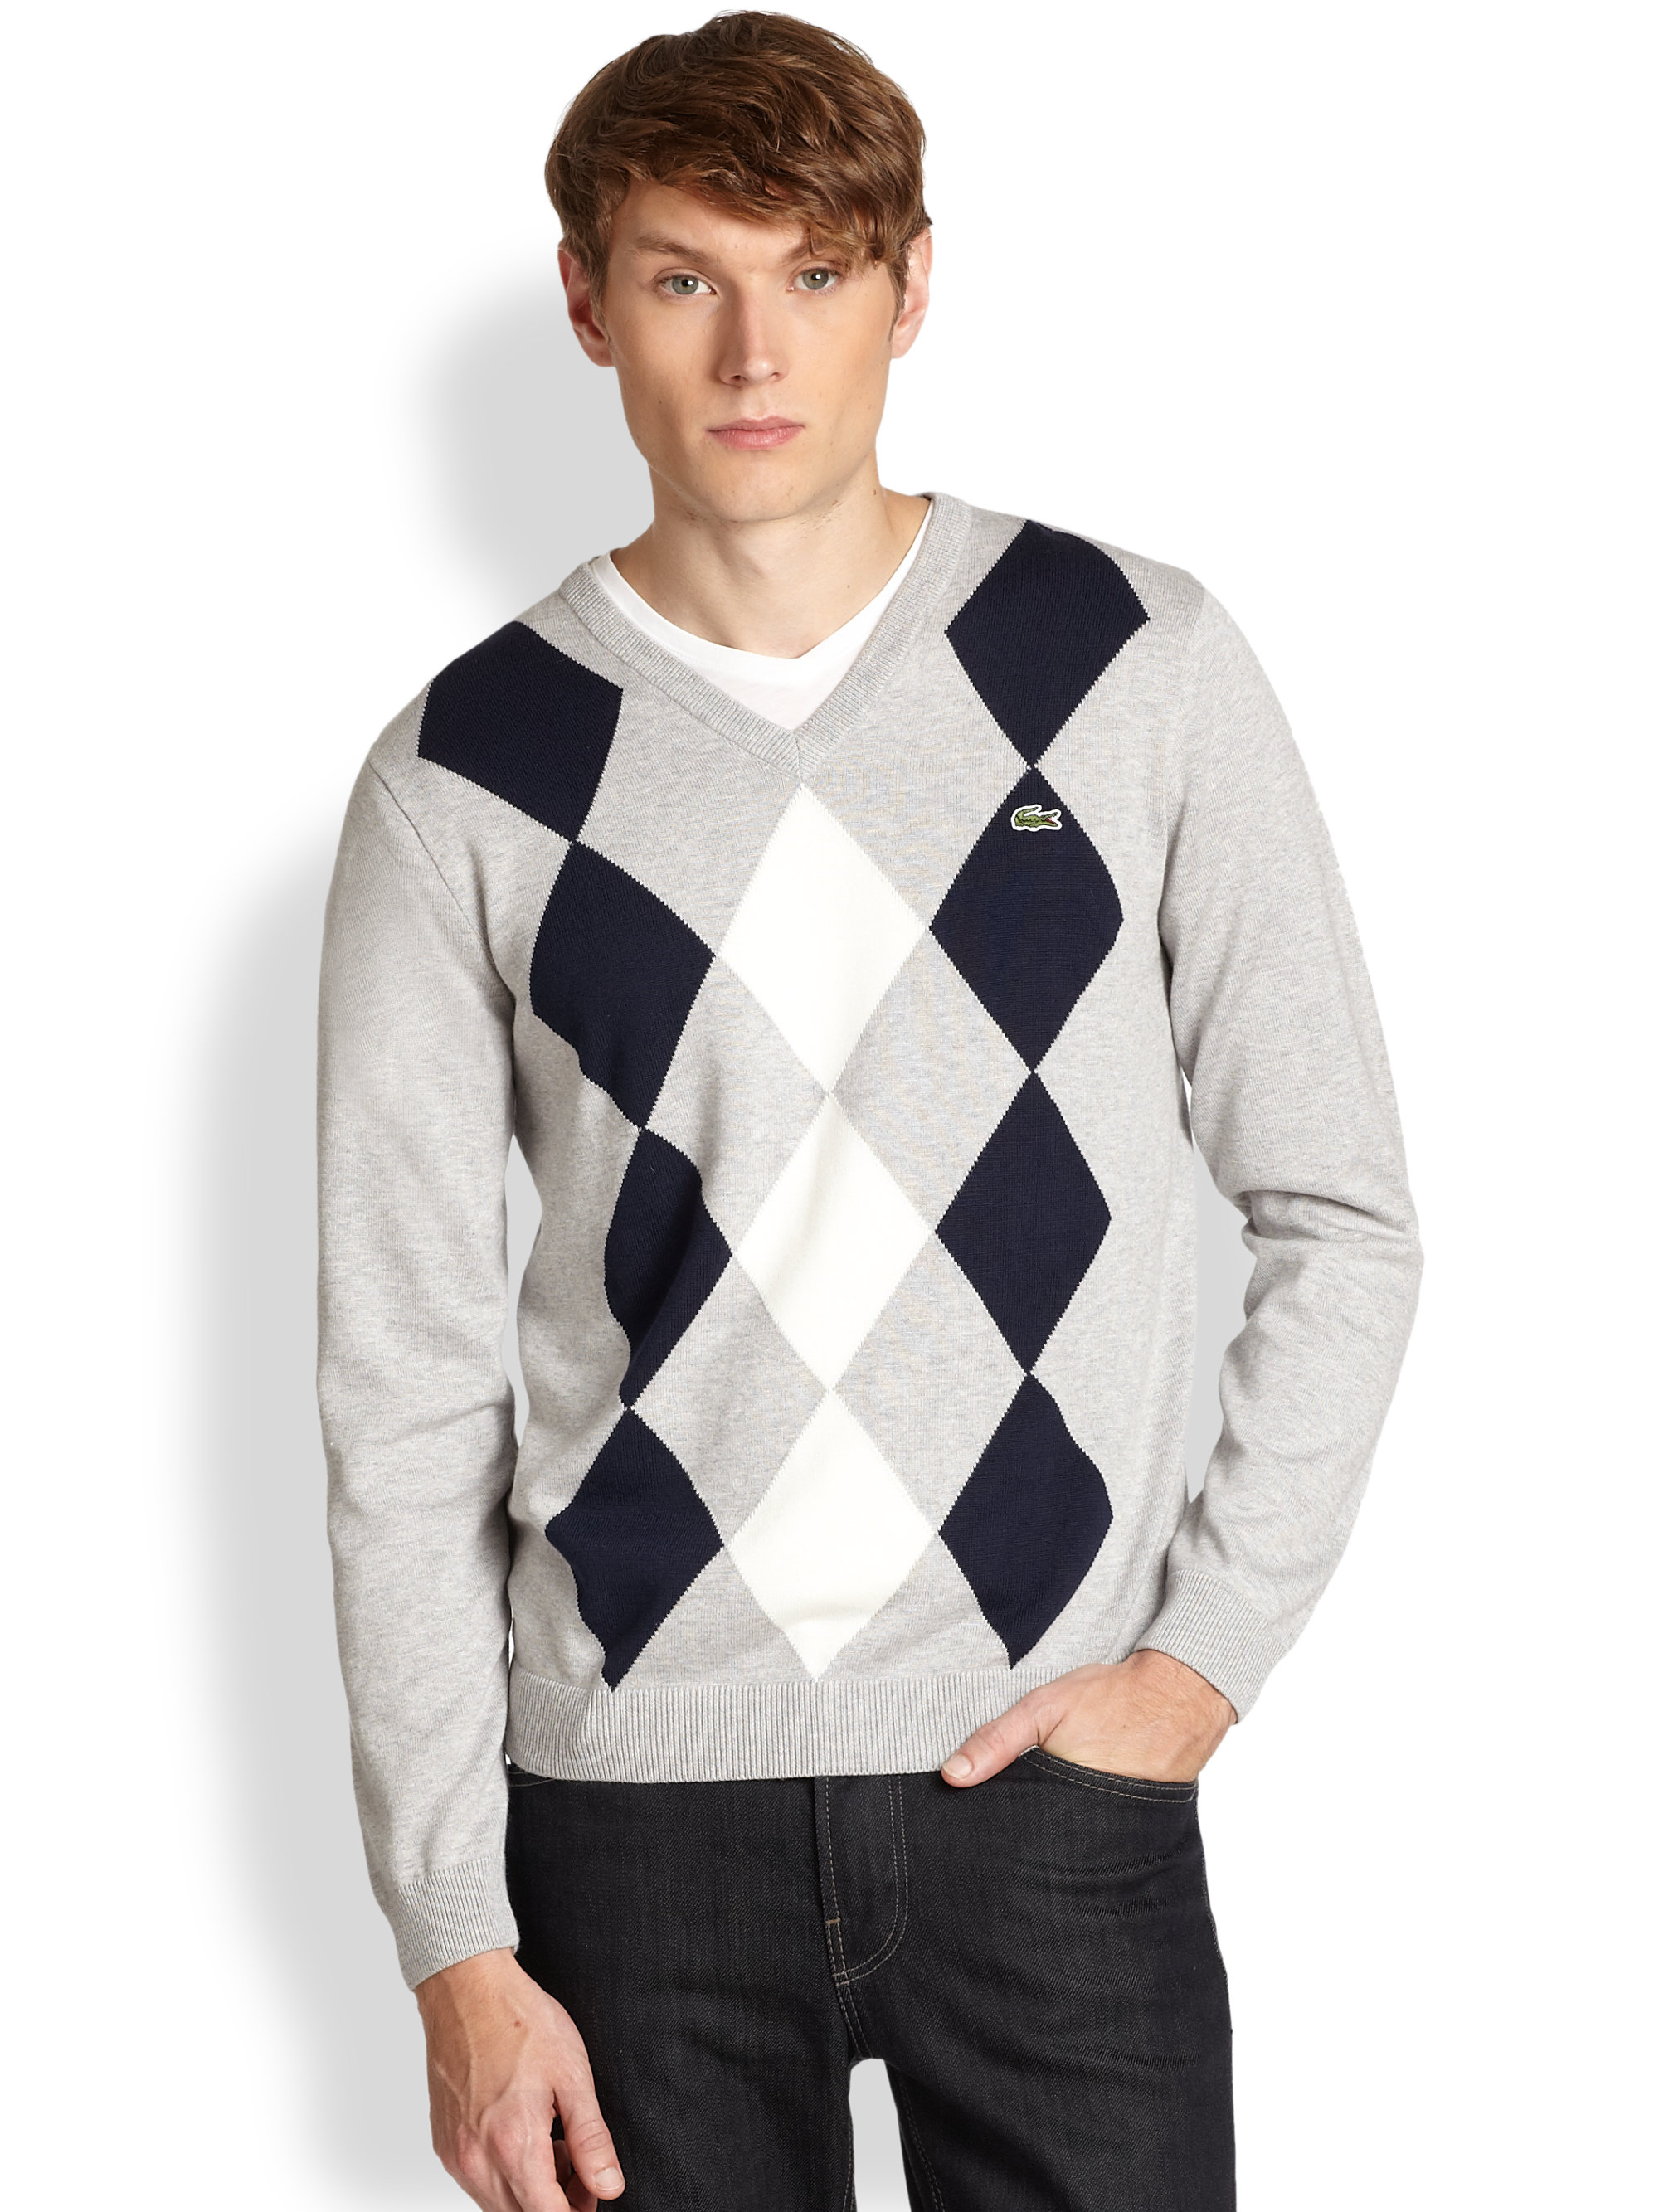 Lyst - Lacoste Argyle Cotton Sweater in Gray for Men